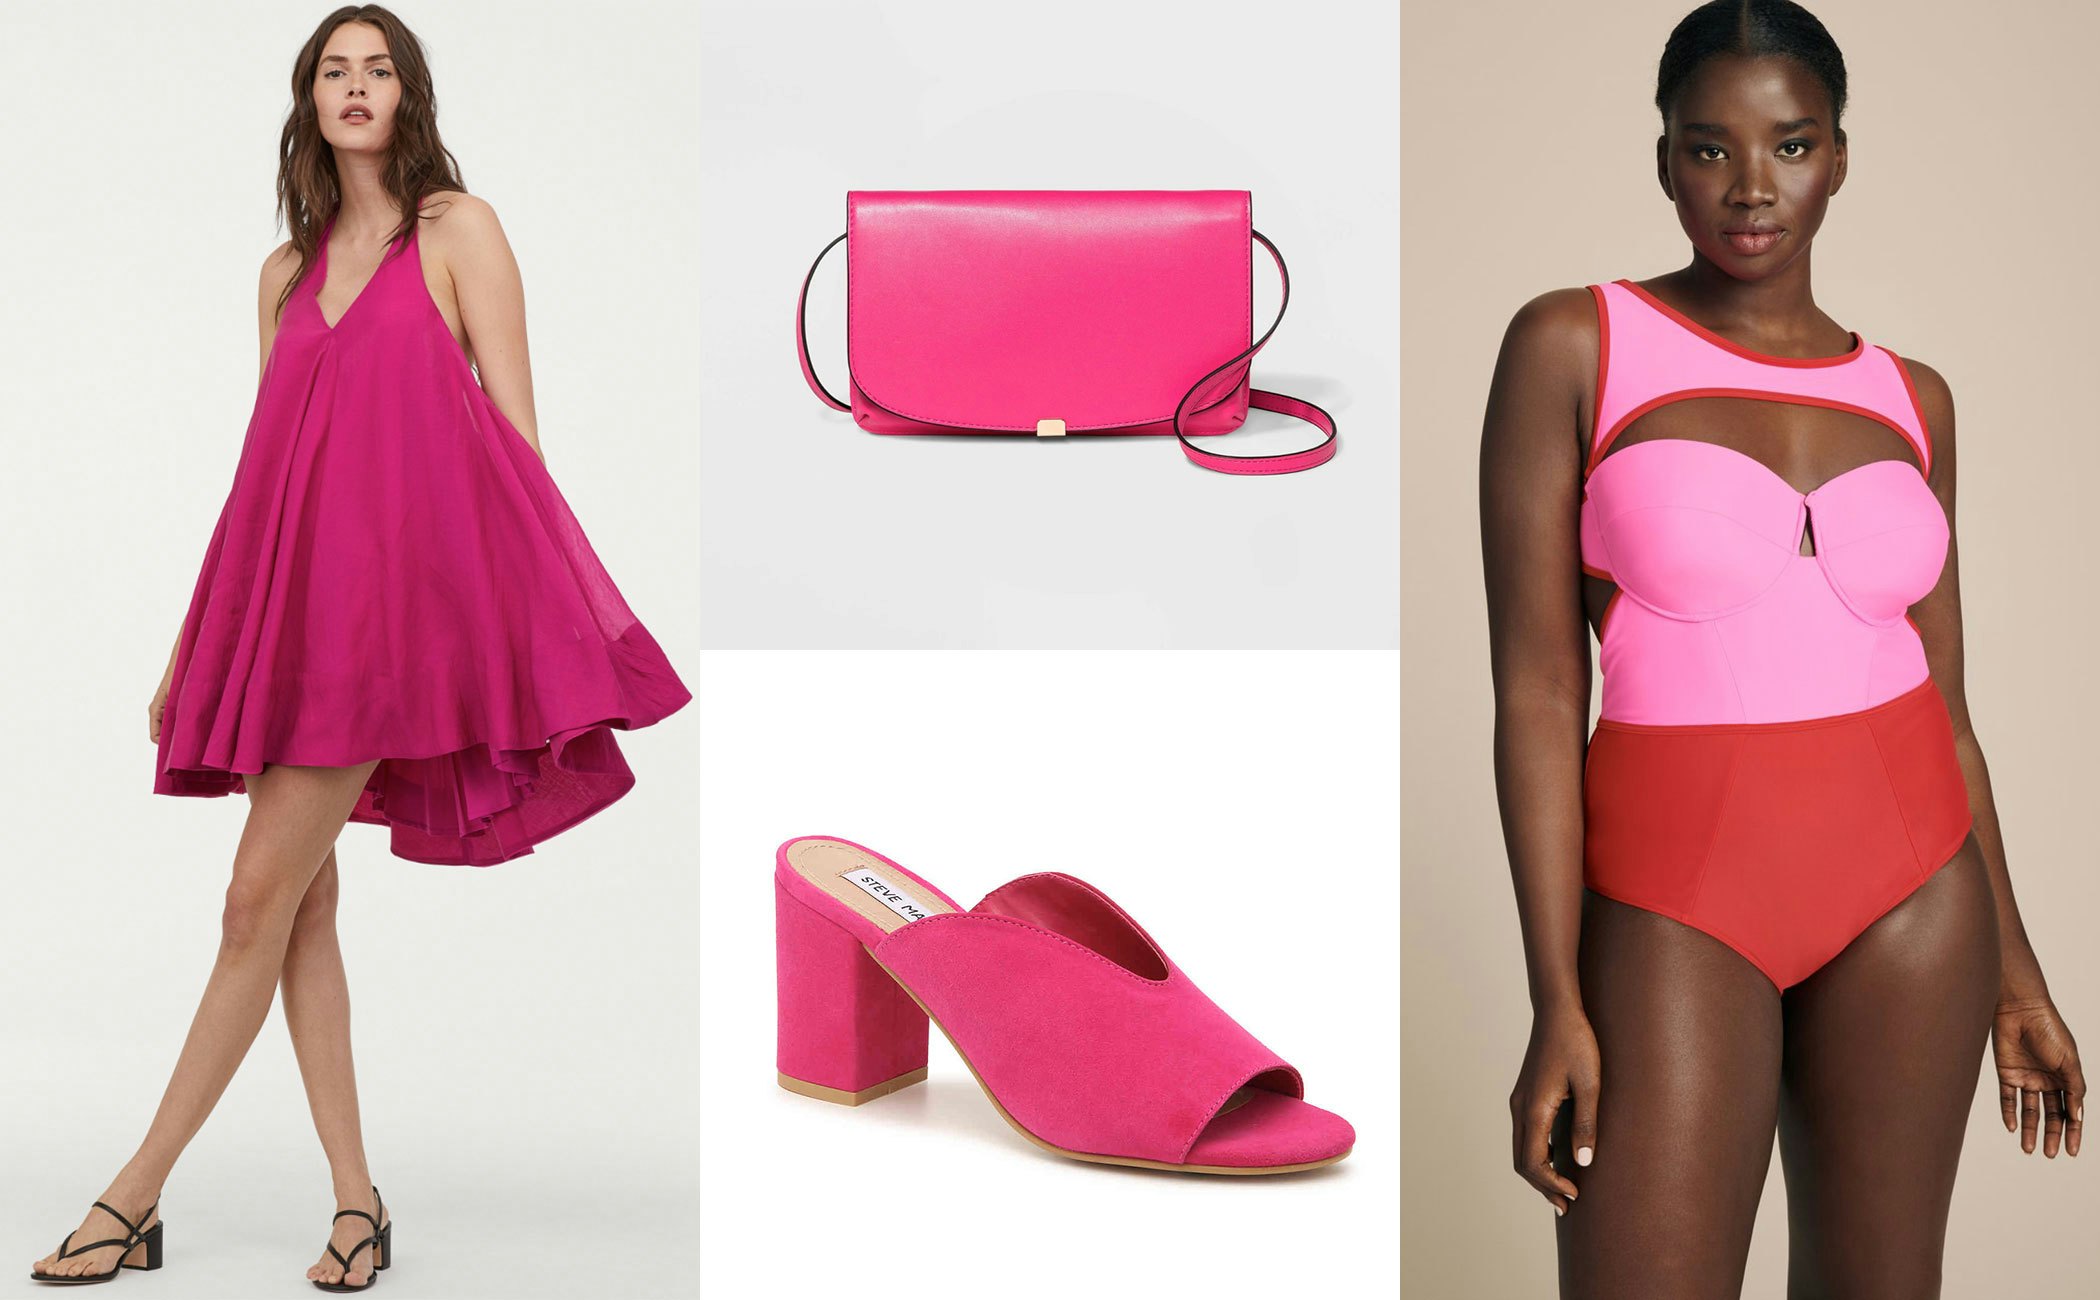 bright pink shoes and clutch